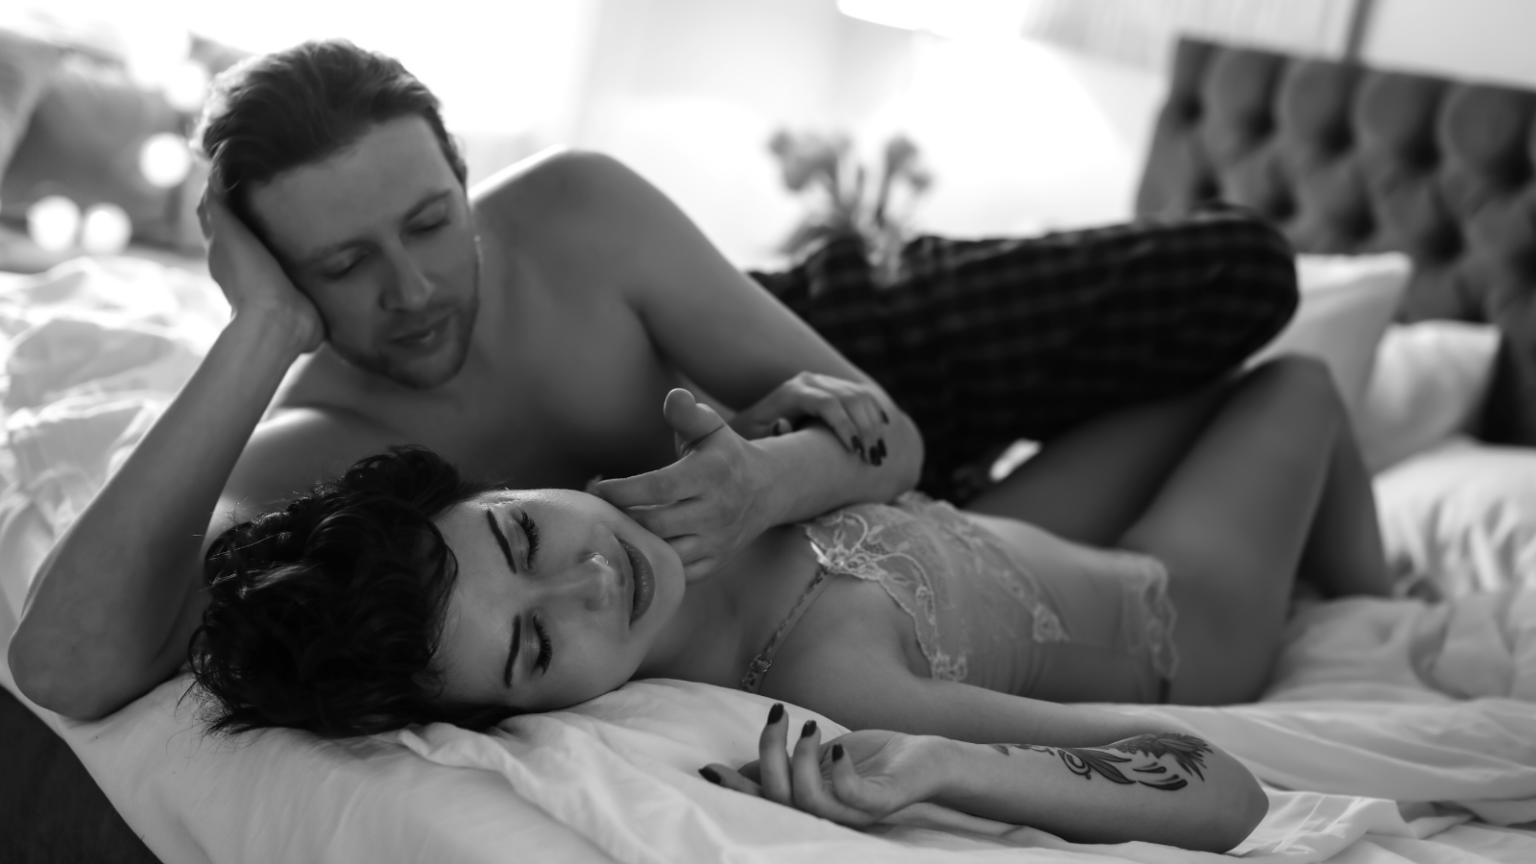 Two partners lying in bed, one masculine looking and the other feminine looking, both with light skin. The masculine partner is gently stroking the face of the feminine partner